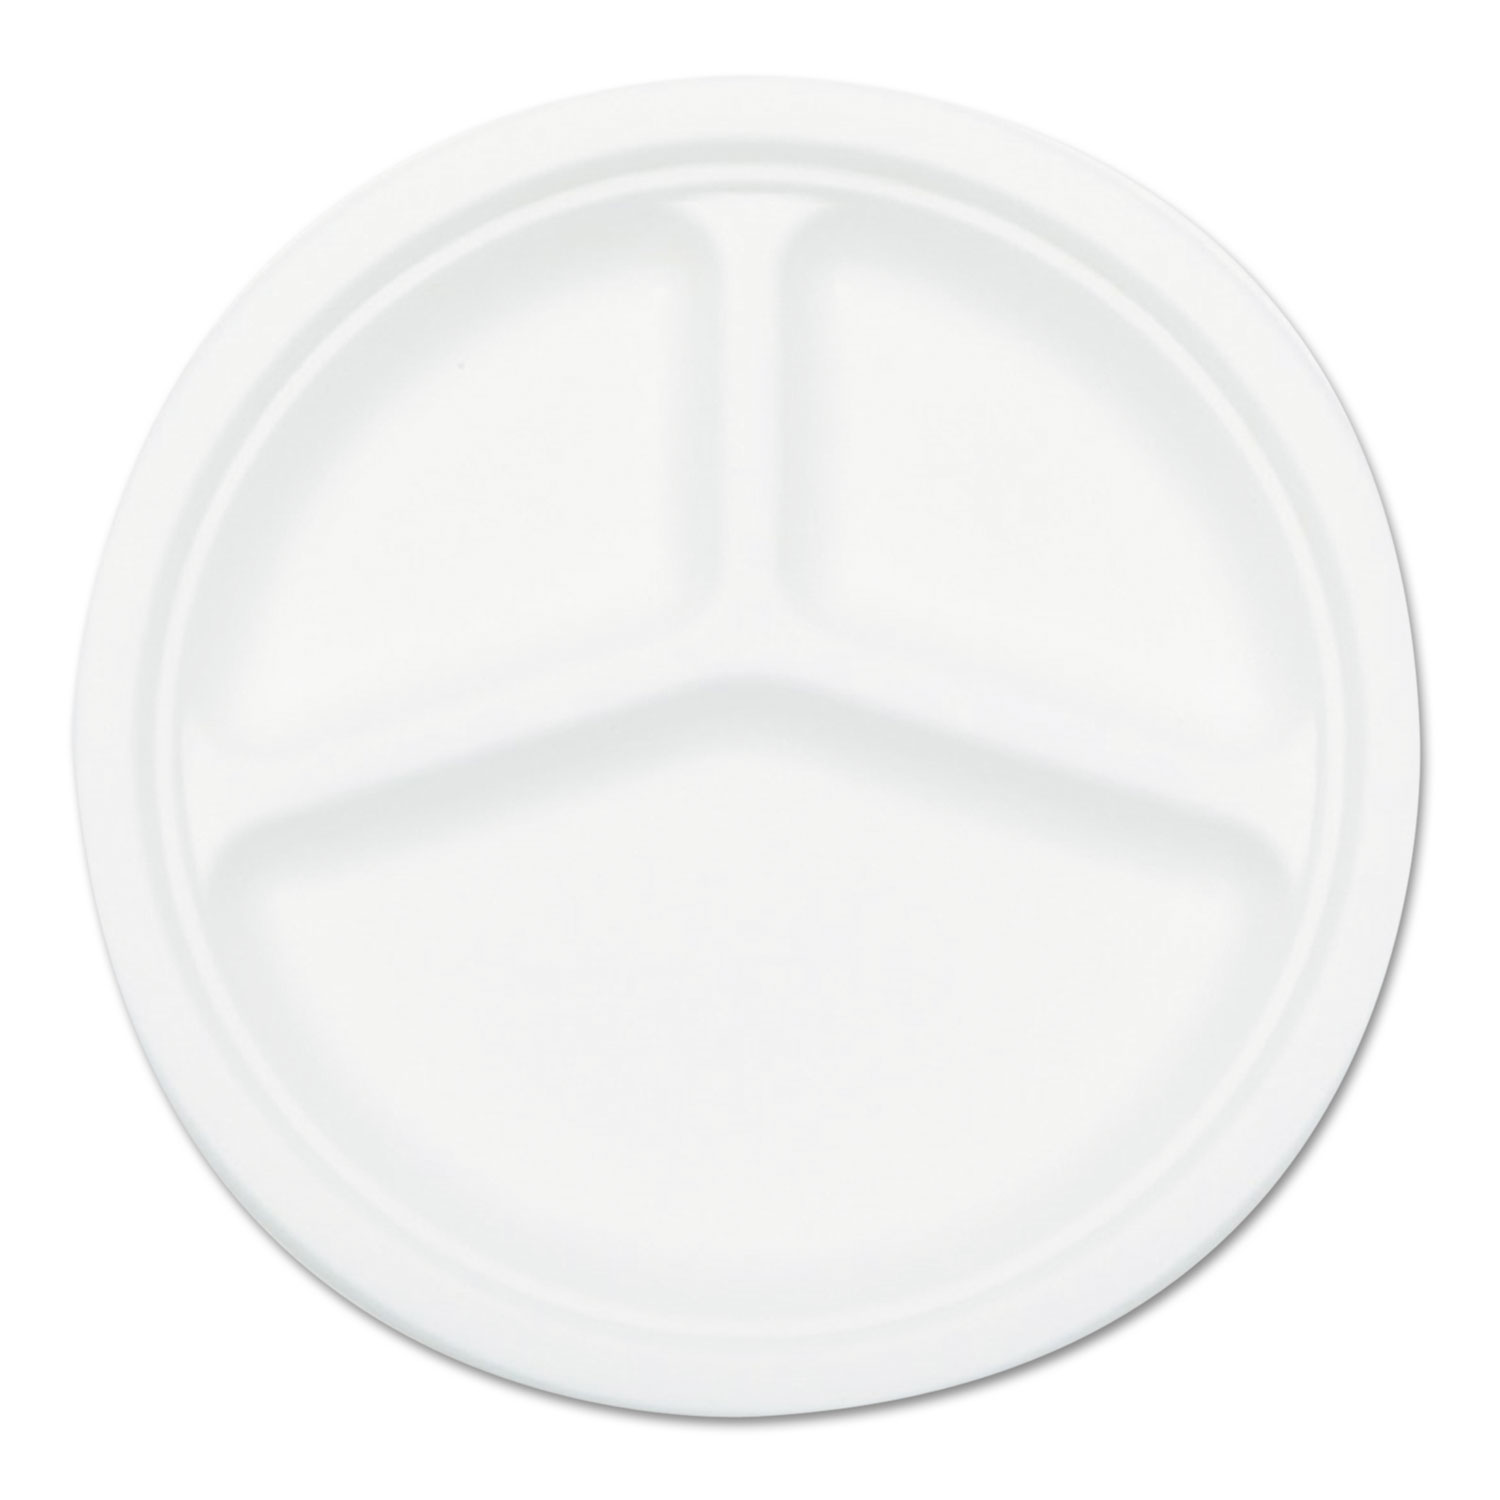 Compostable Sugarcane Bagasse 10 in 3-Compartment Plate, White, 500/Carton